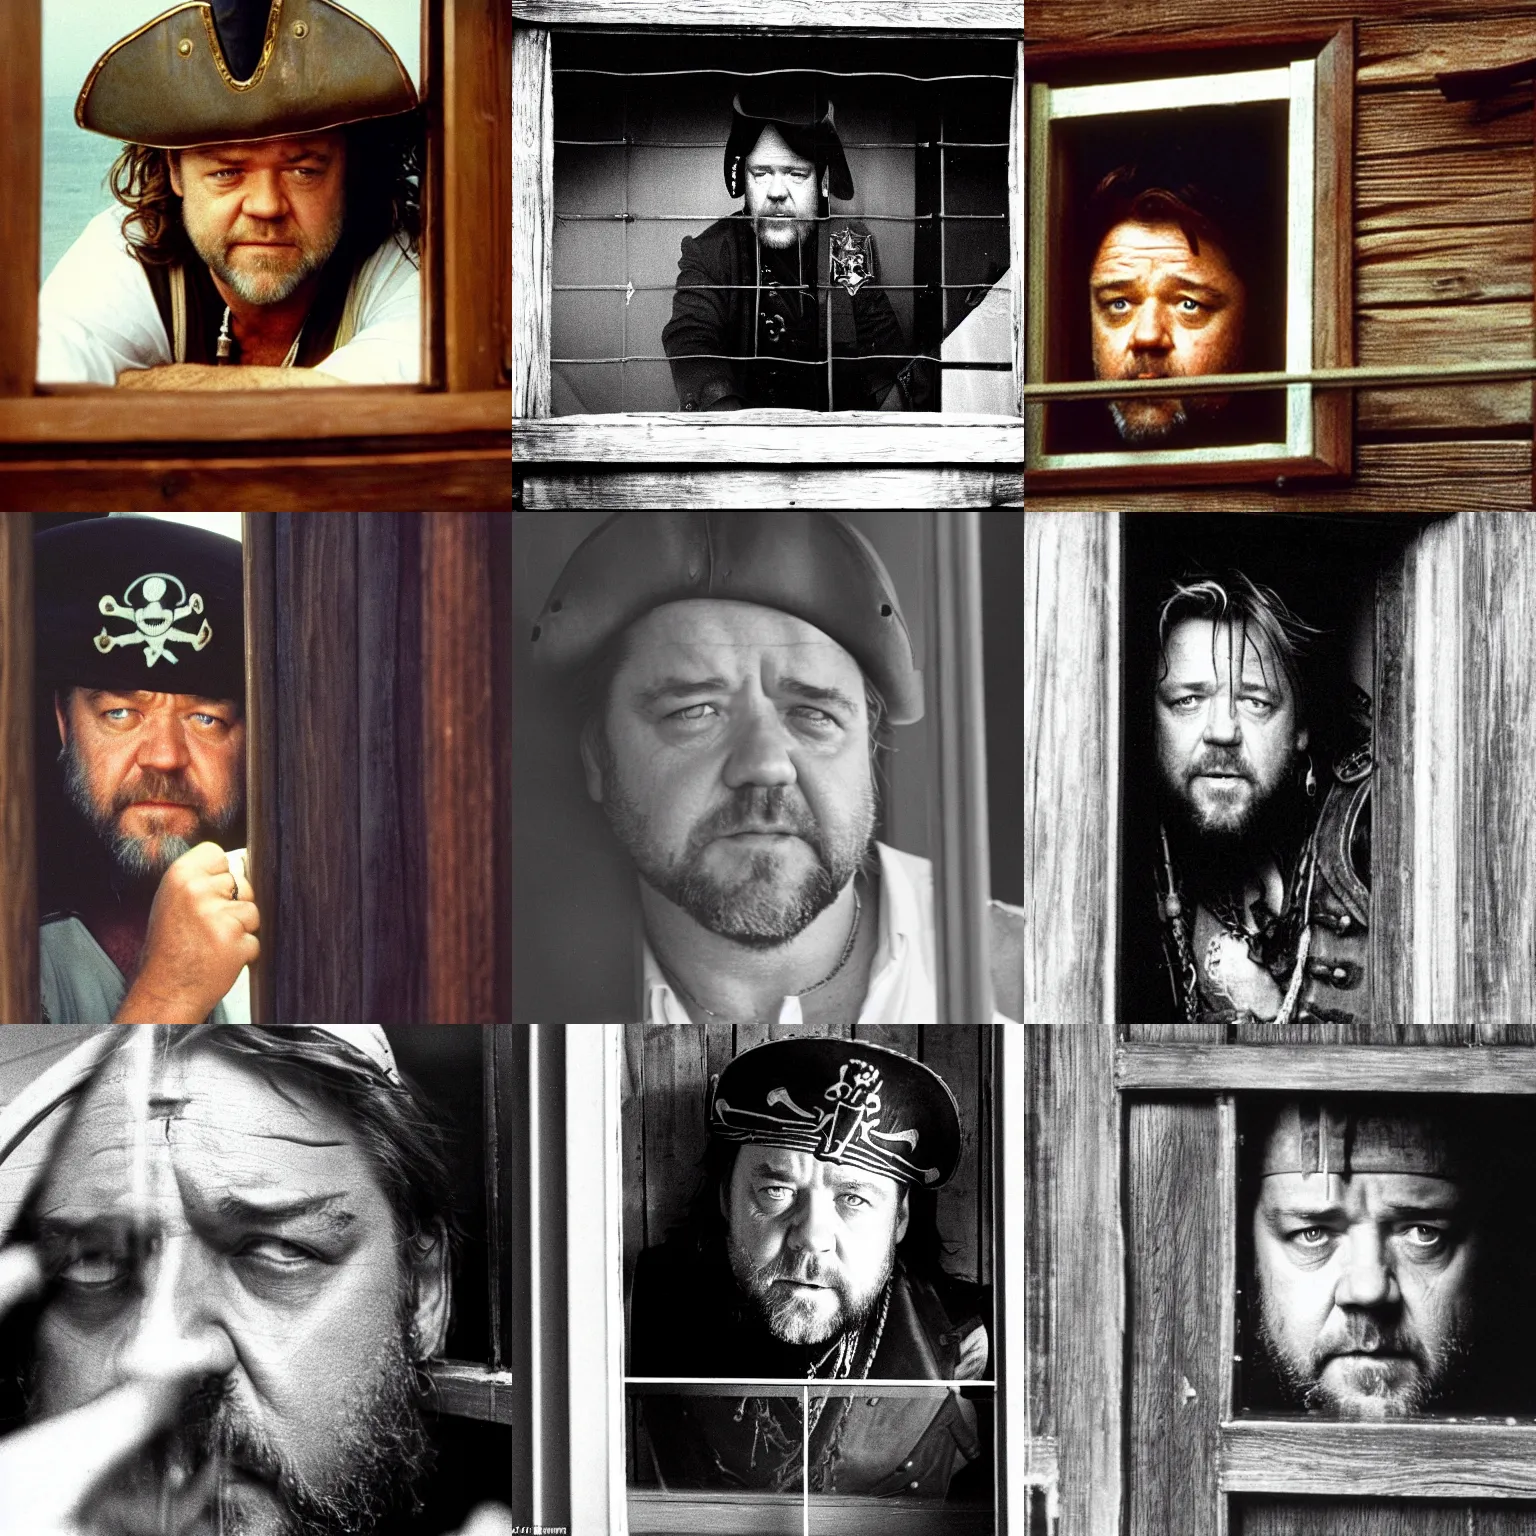 Prompt: russell crowe with large wide pirate captain hat peering out concerned down to camera from a small glass window in a wooden wall, 1 9 9 0